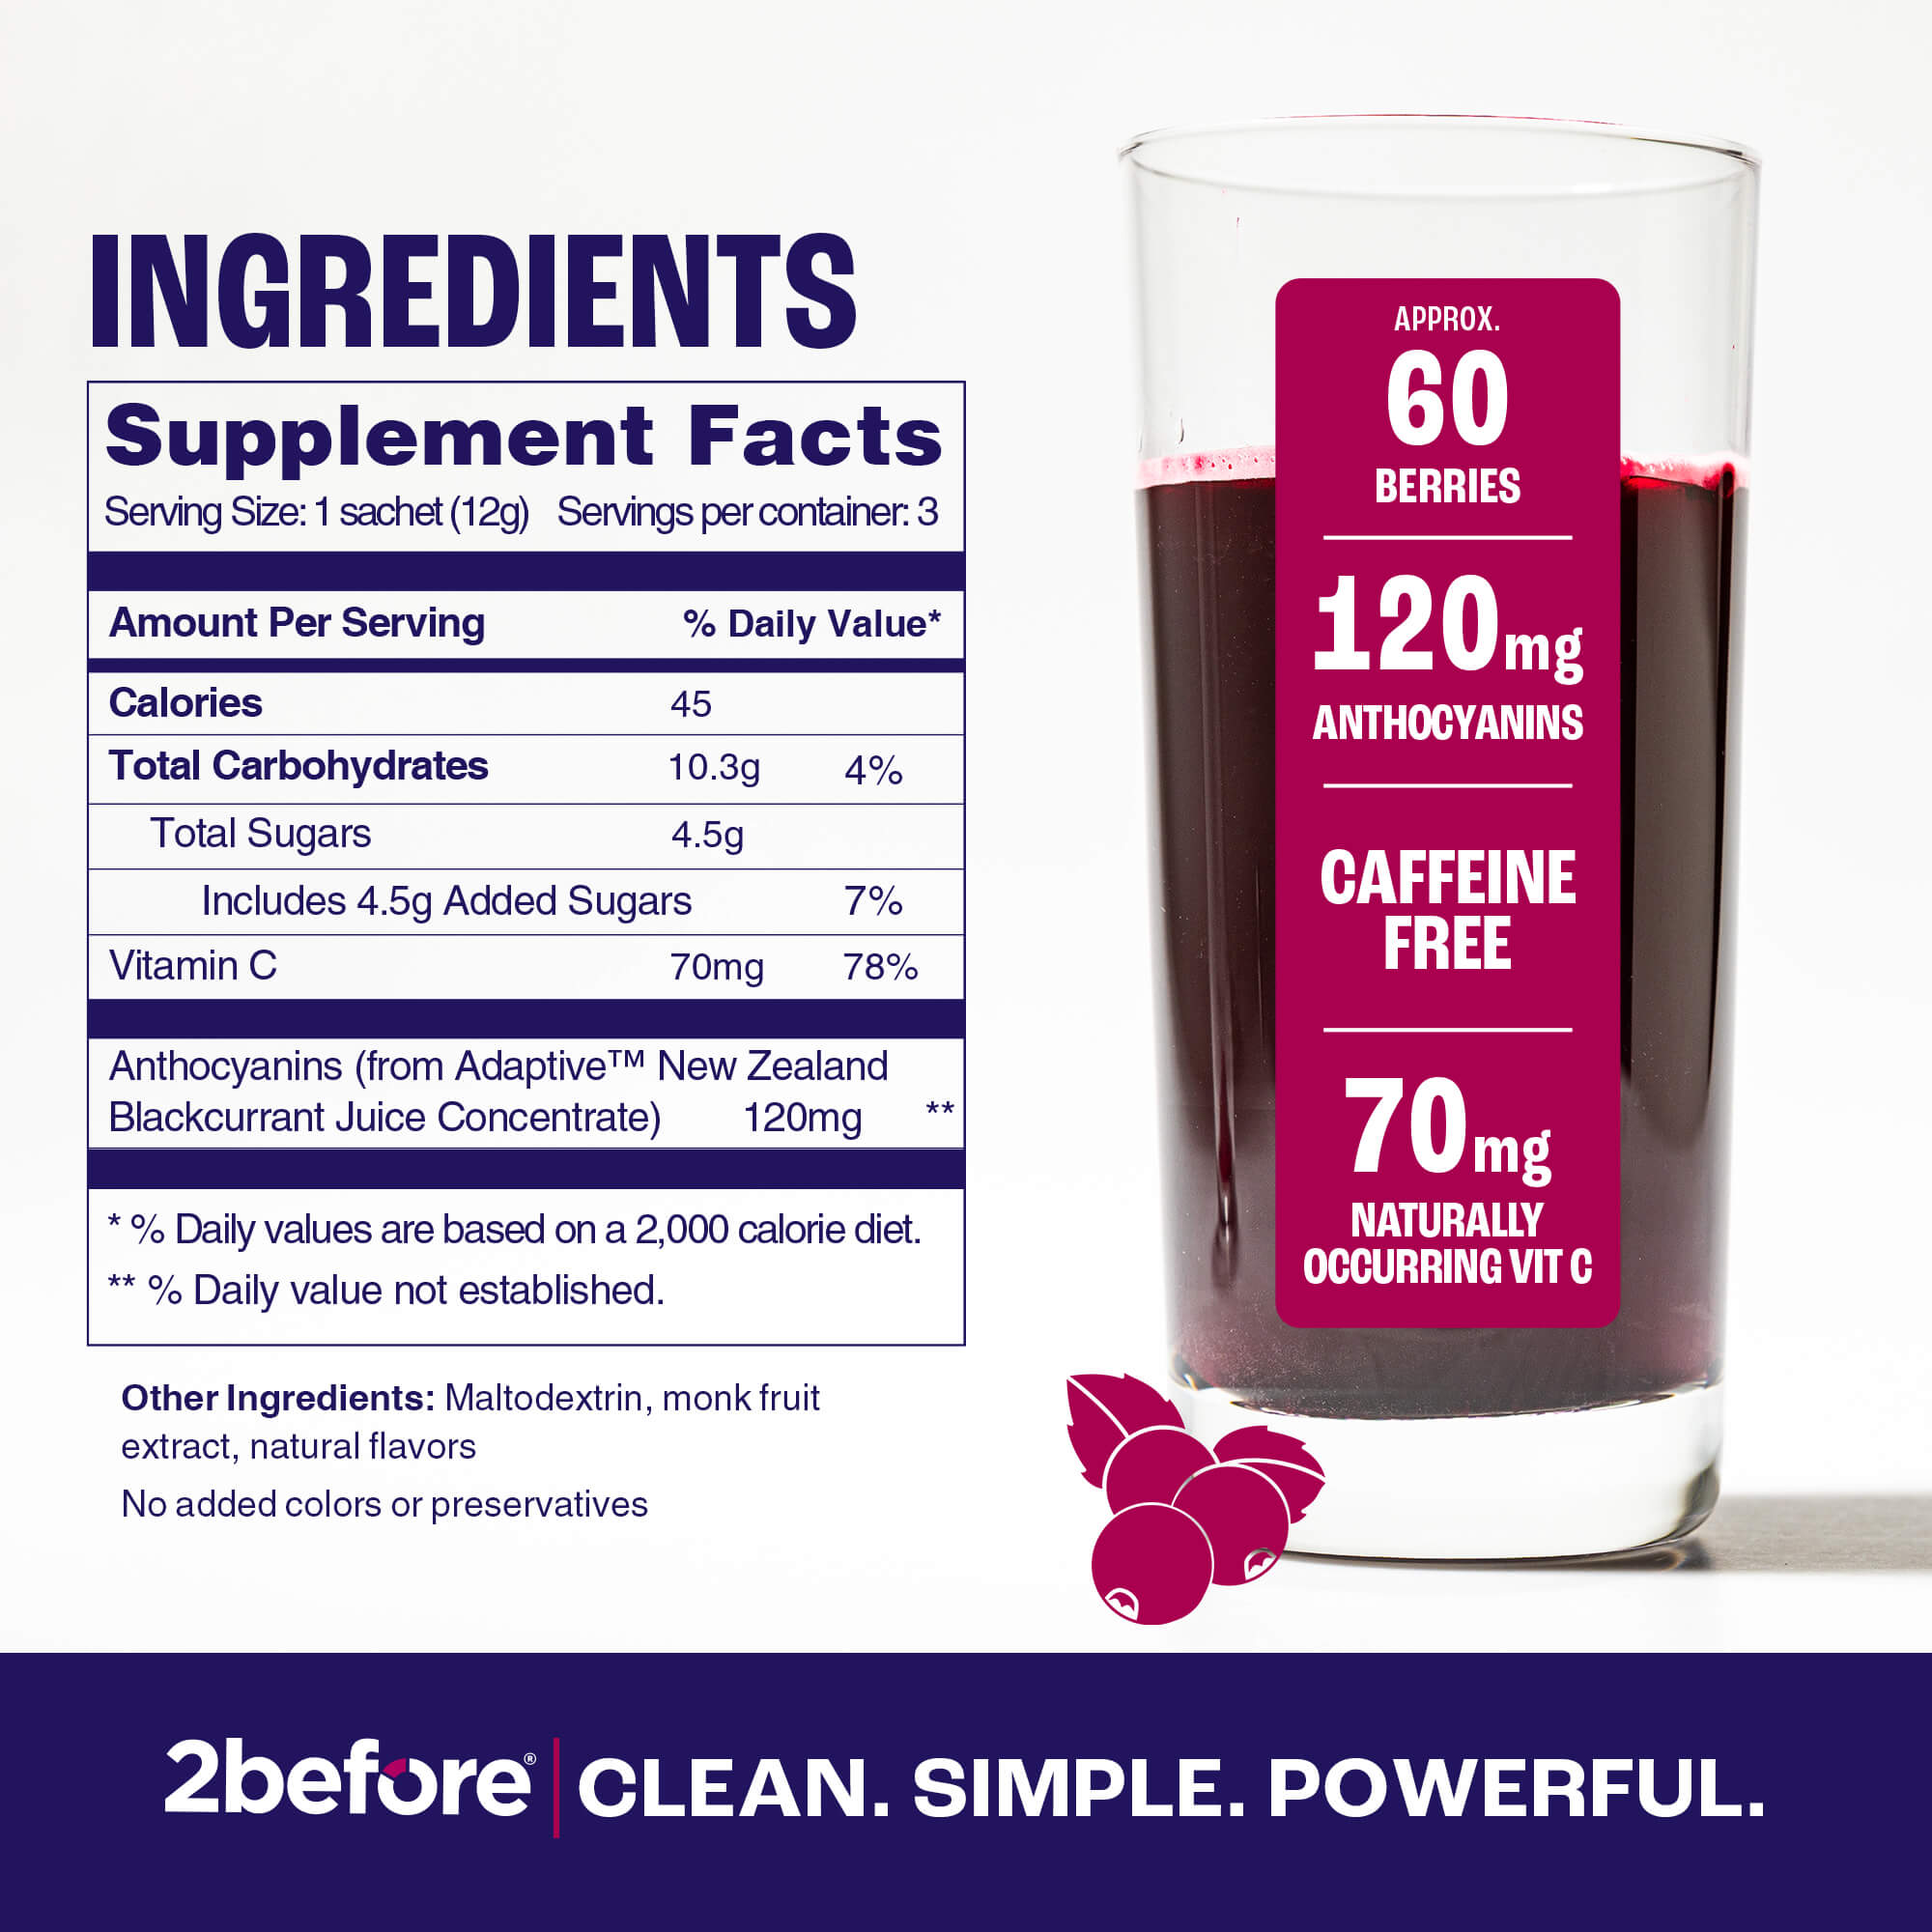 The ingredients in 2before's blackcurrant pre-workout